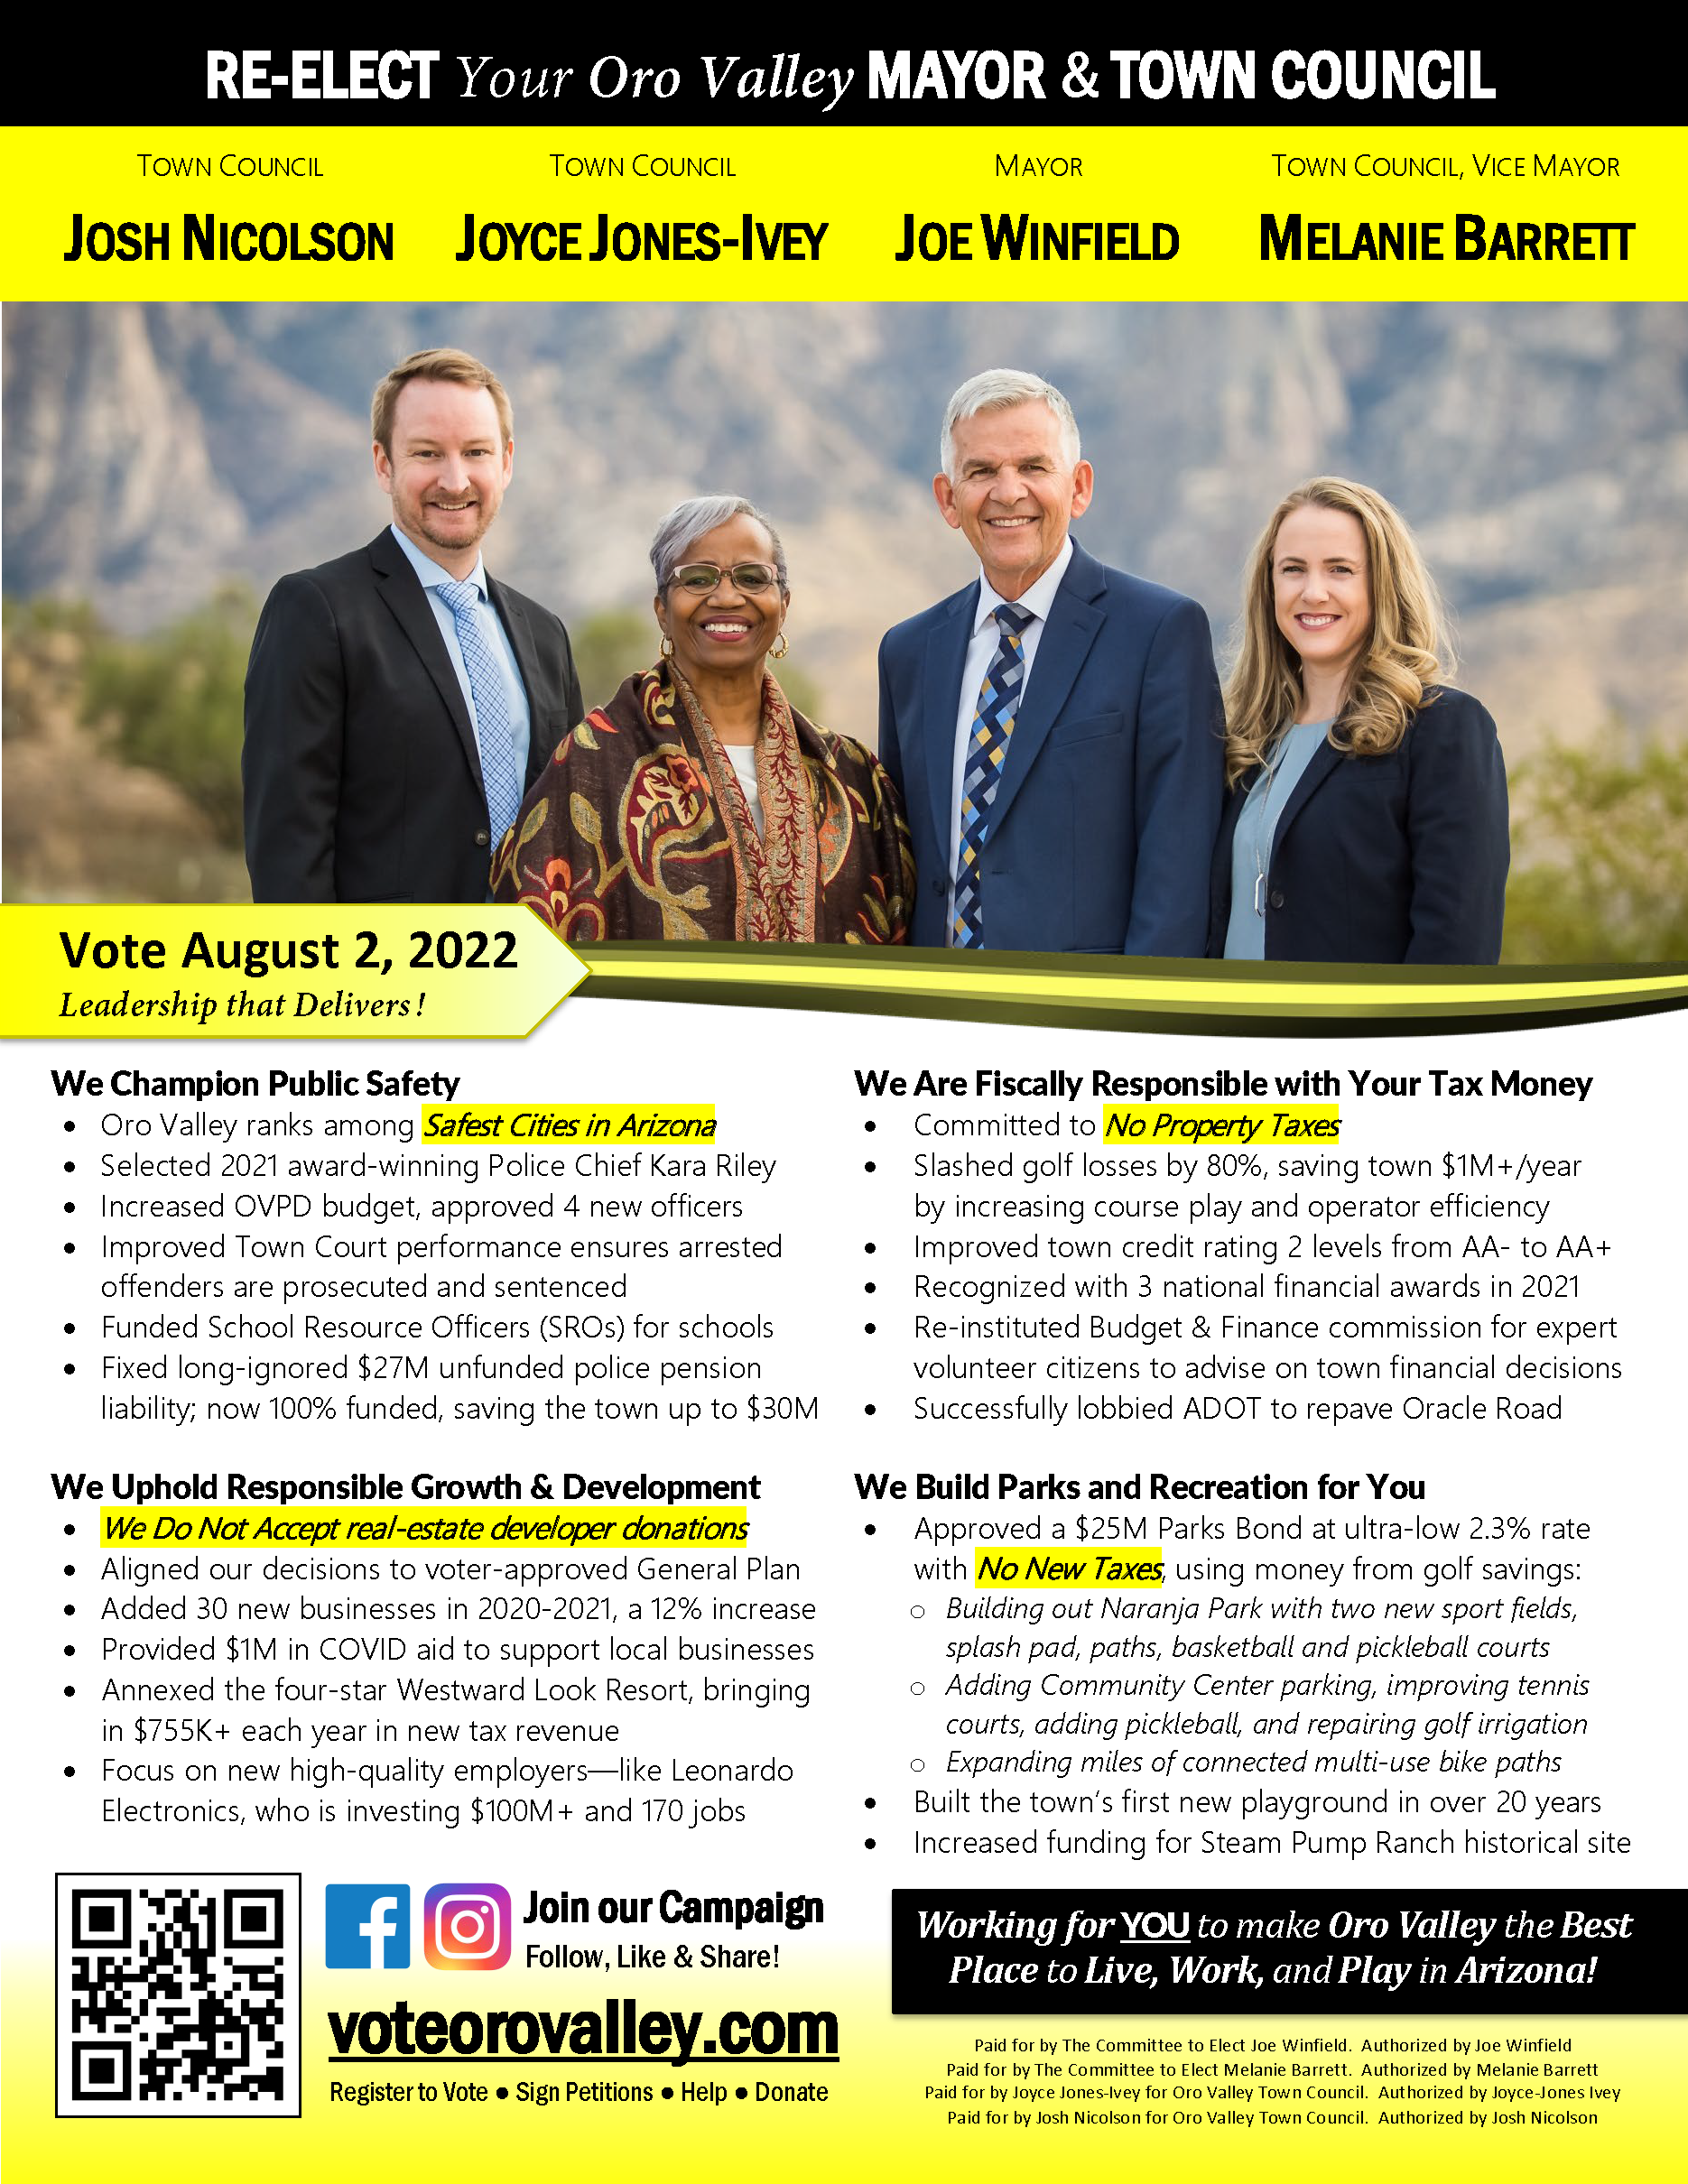 Re-elect Winfield, Barrett, Jones-Ivey and Nicolson to Oro Valley Town Council